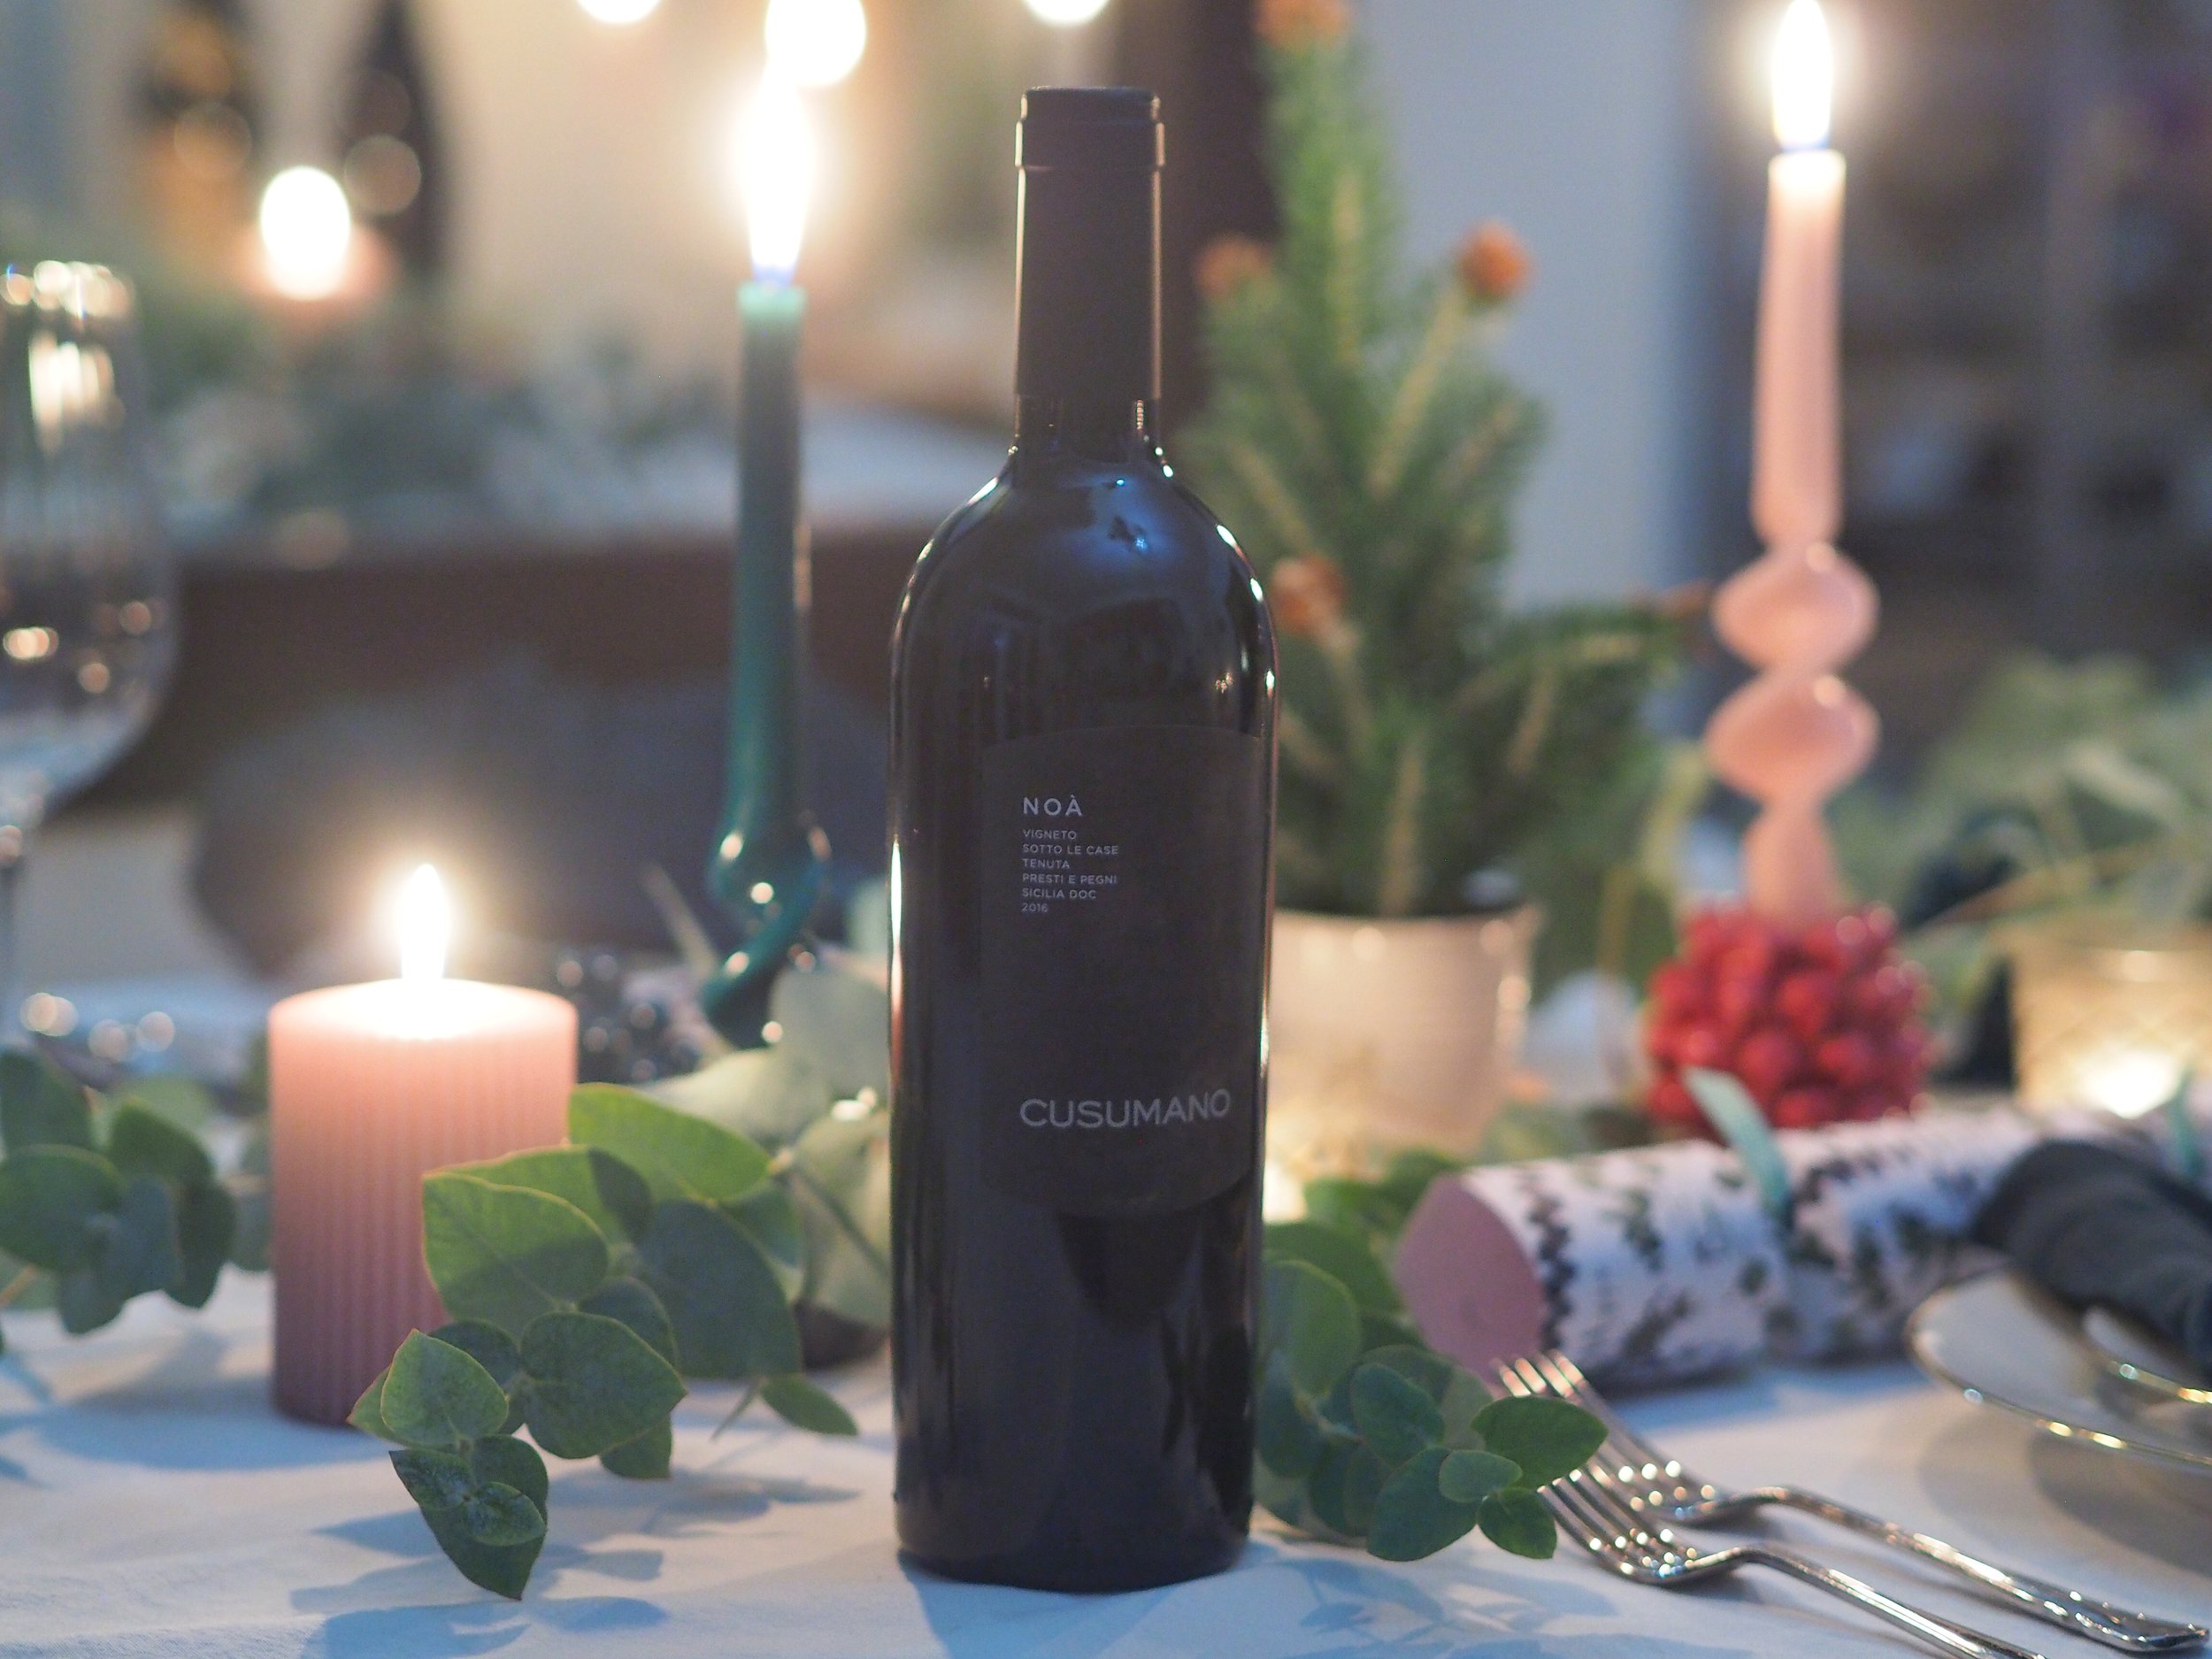 5 Italian Red Wines For Your Christmas Dinner — Lois Avery